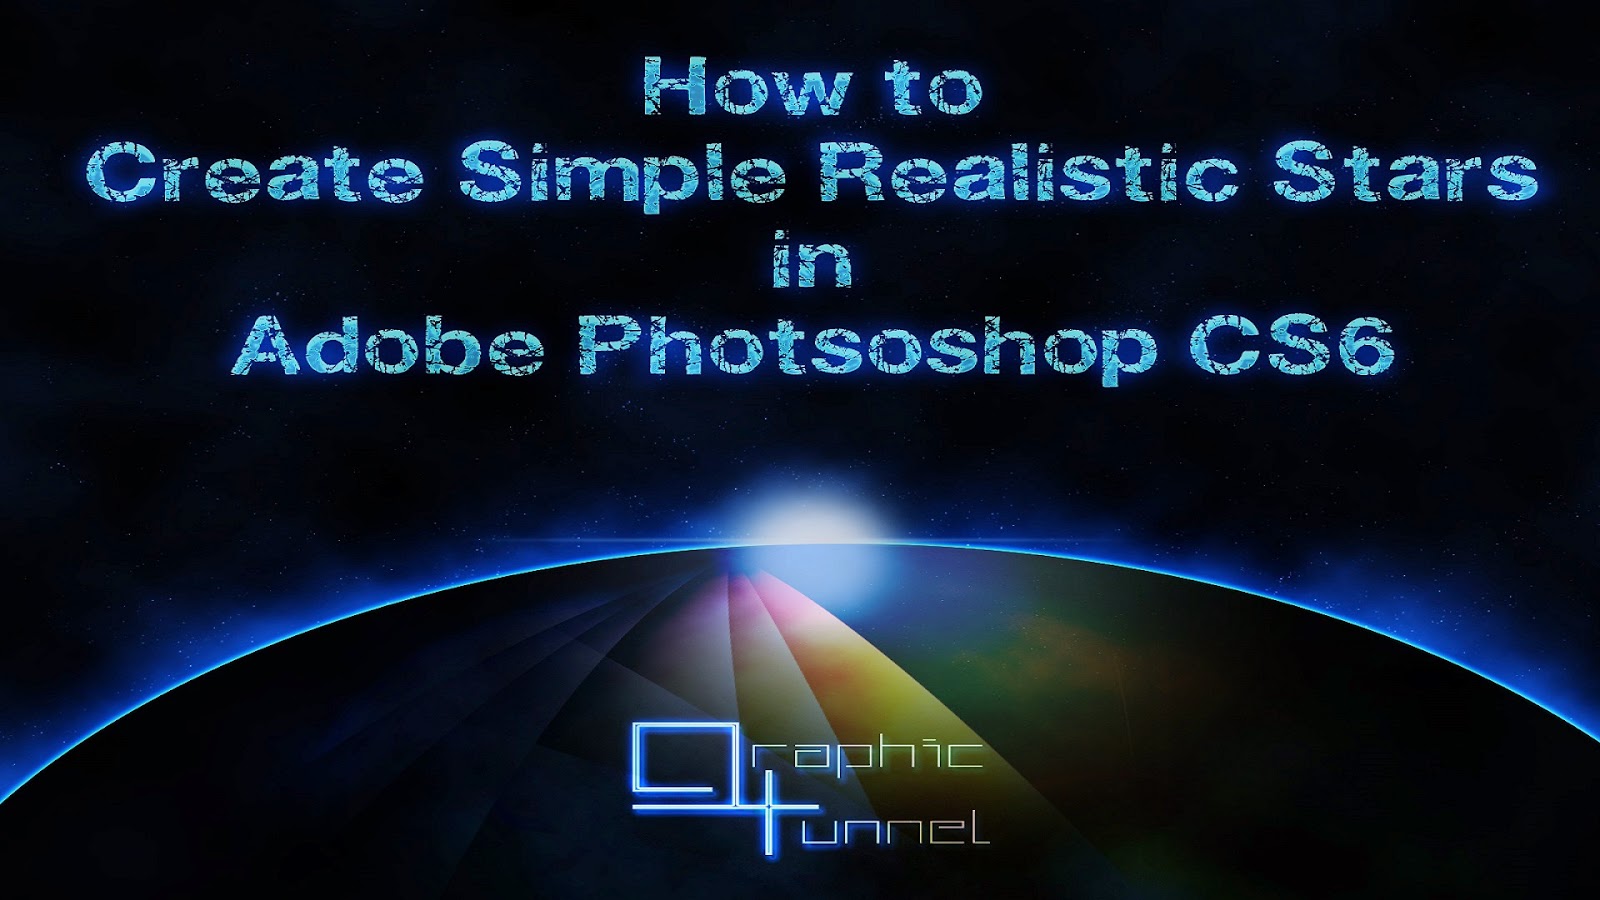 how to make clipart in photoshop cs6 - photo #24